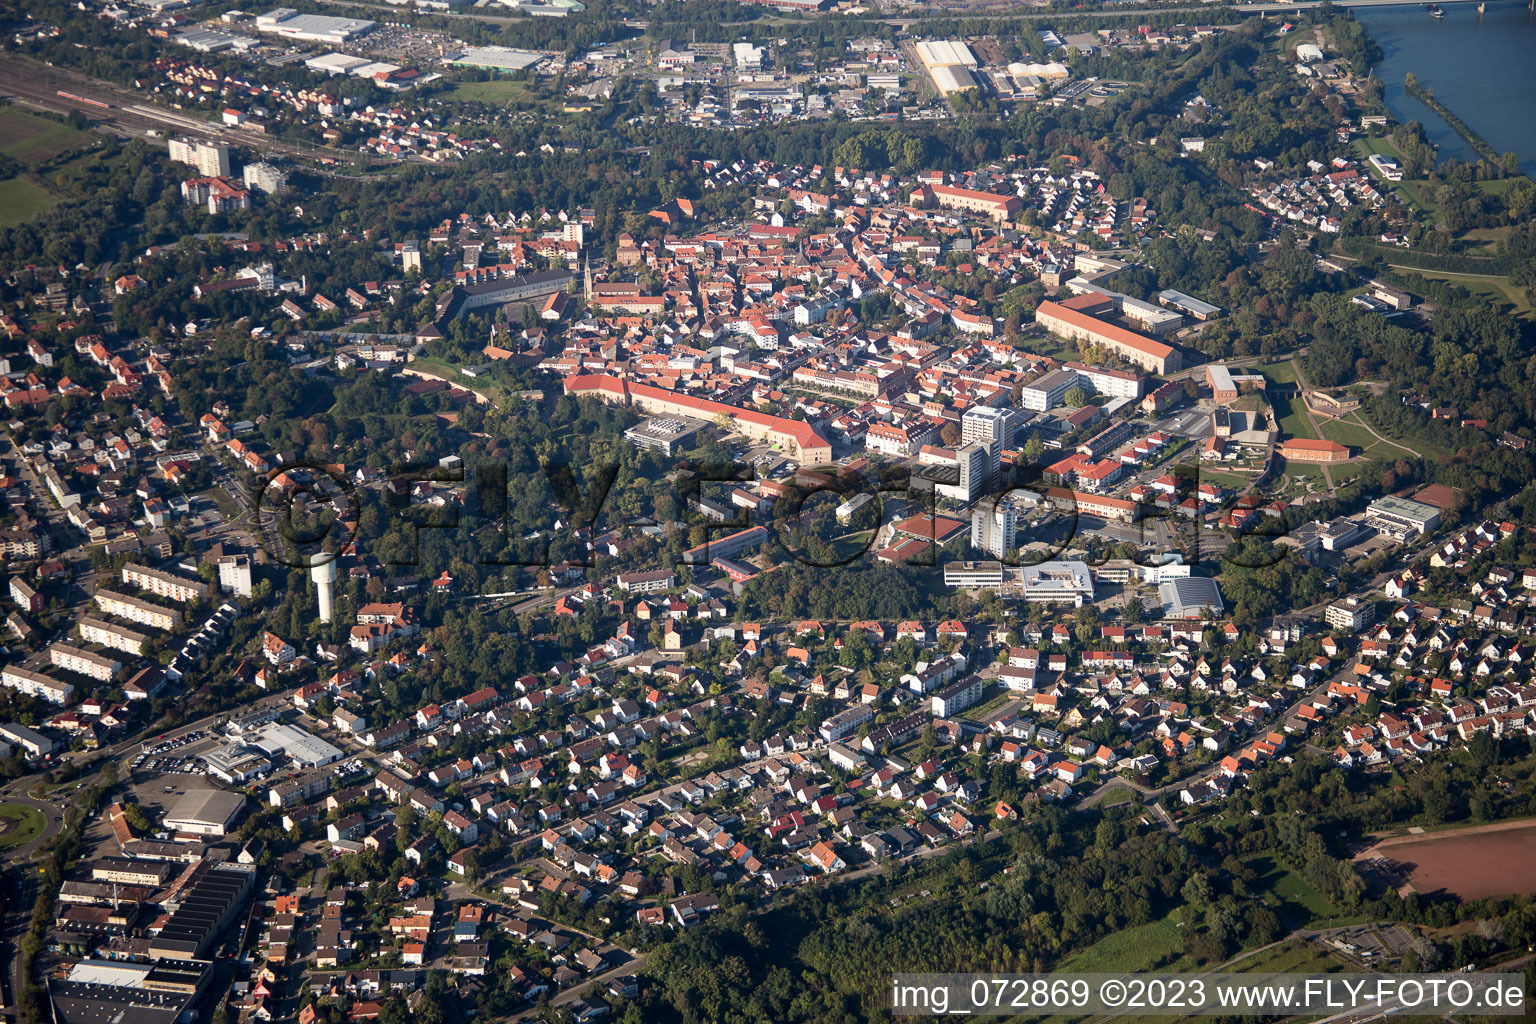 Oblique view of Germersheim in the state Rhineland-Palatinate, Germany